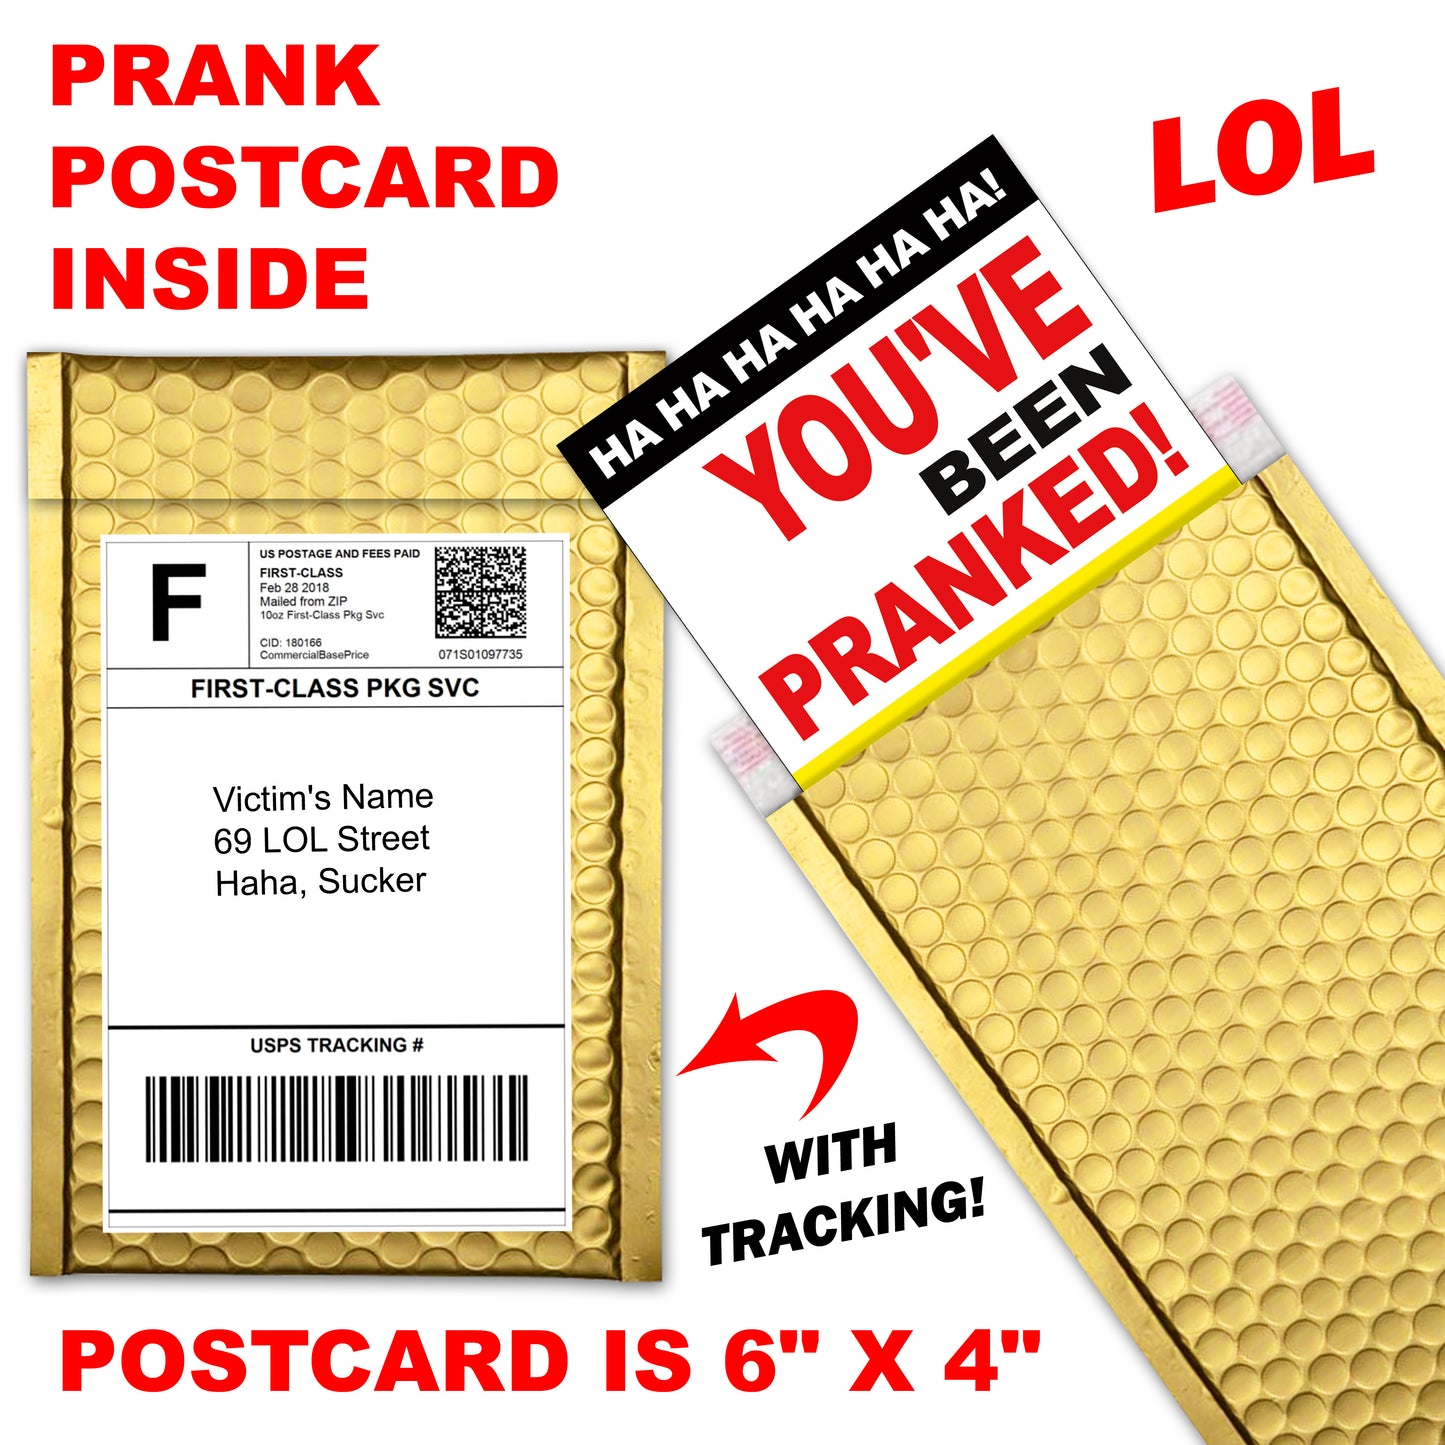 Doctor Appointment Prank 20 Fake Conditions Prank Mail